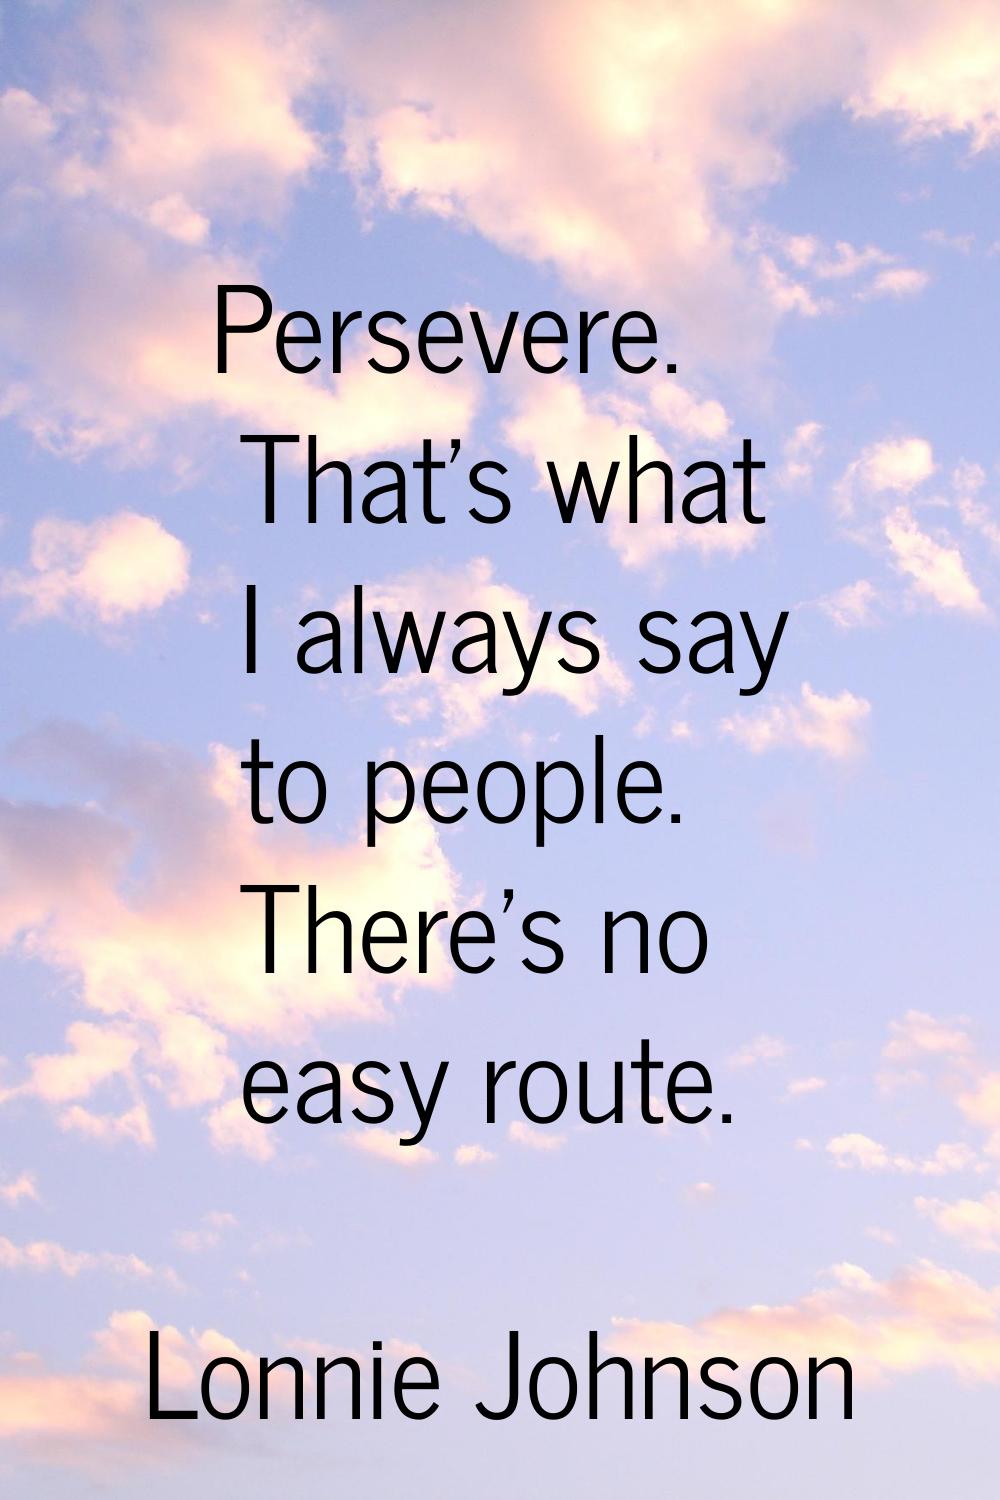 Persevere. That's what I always say to people. There's no easy route.